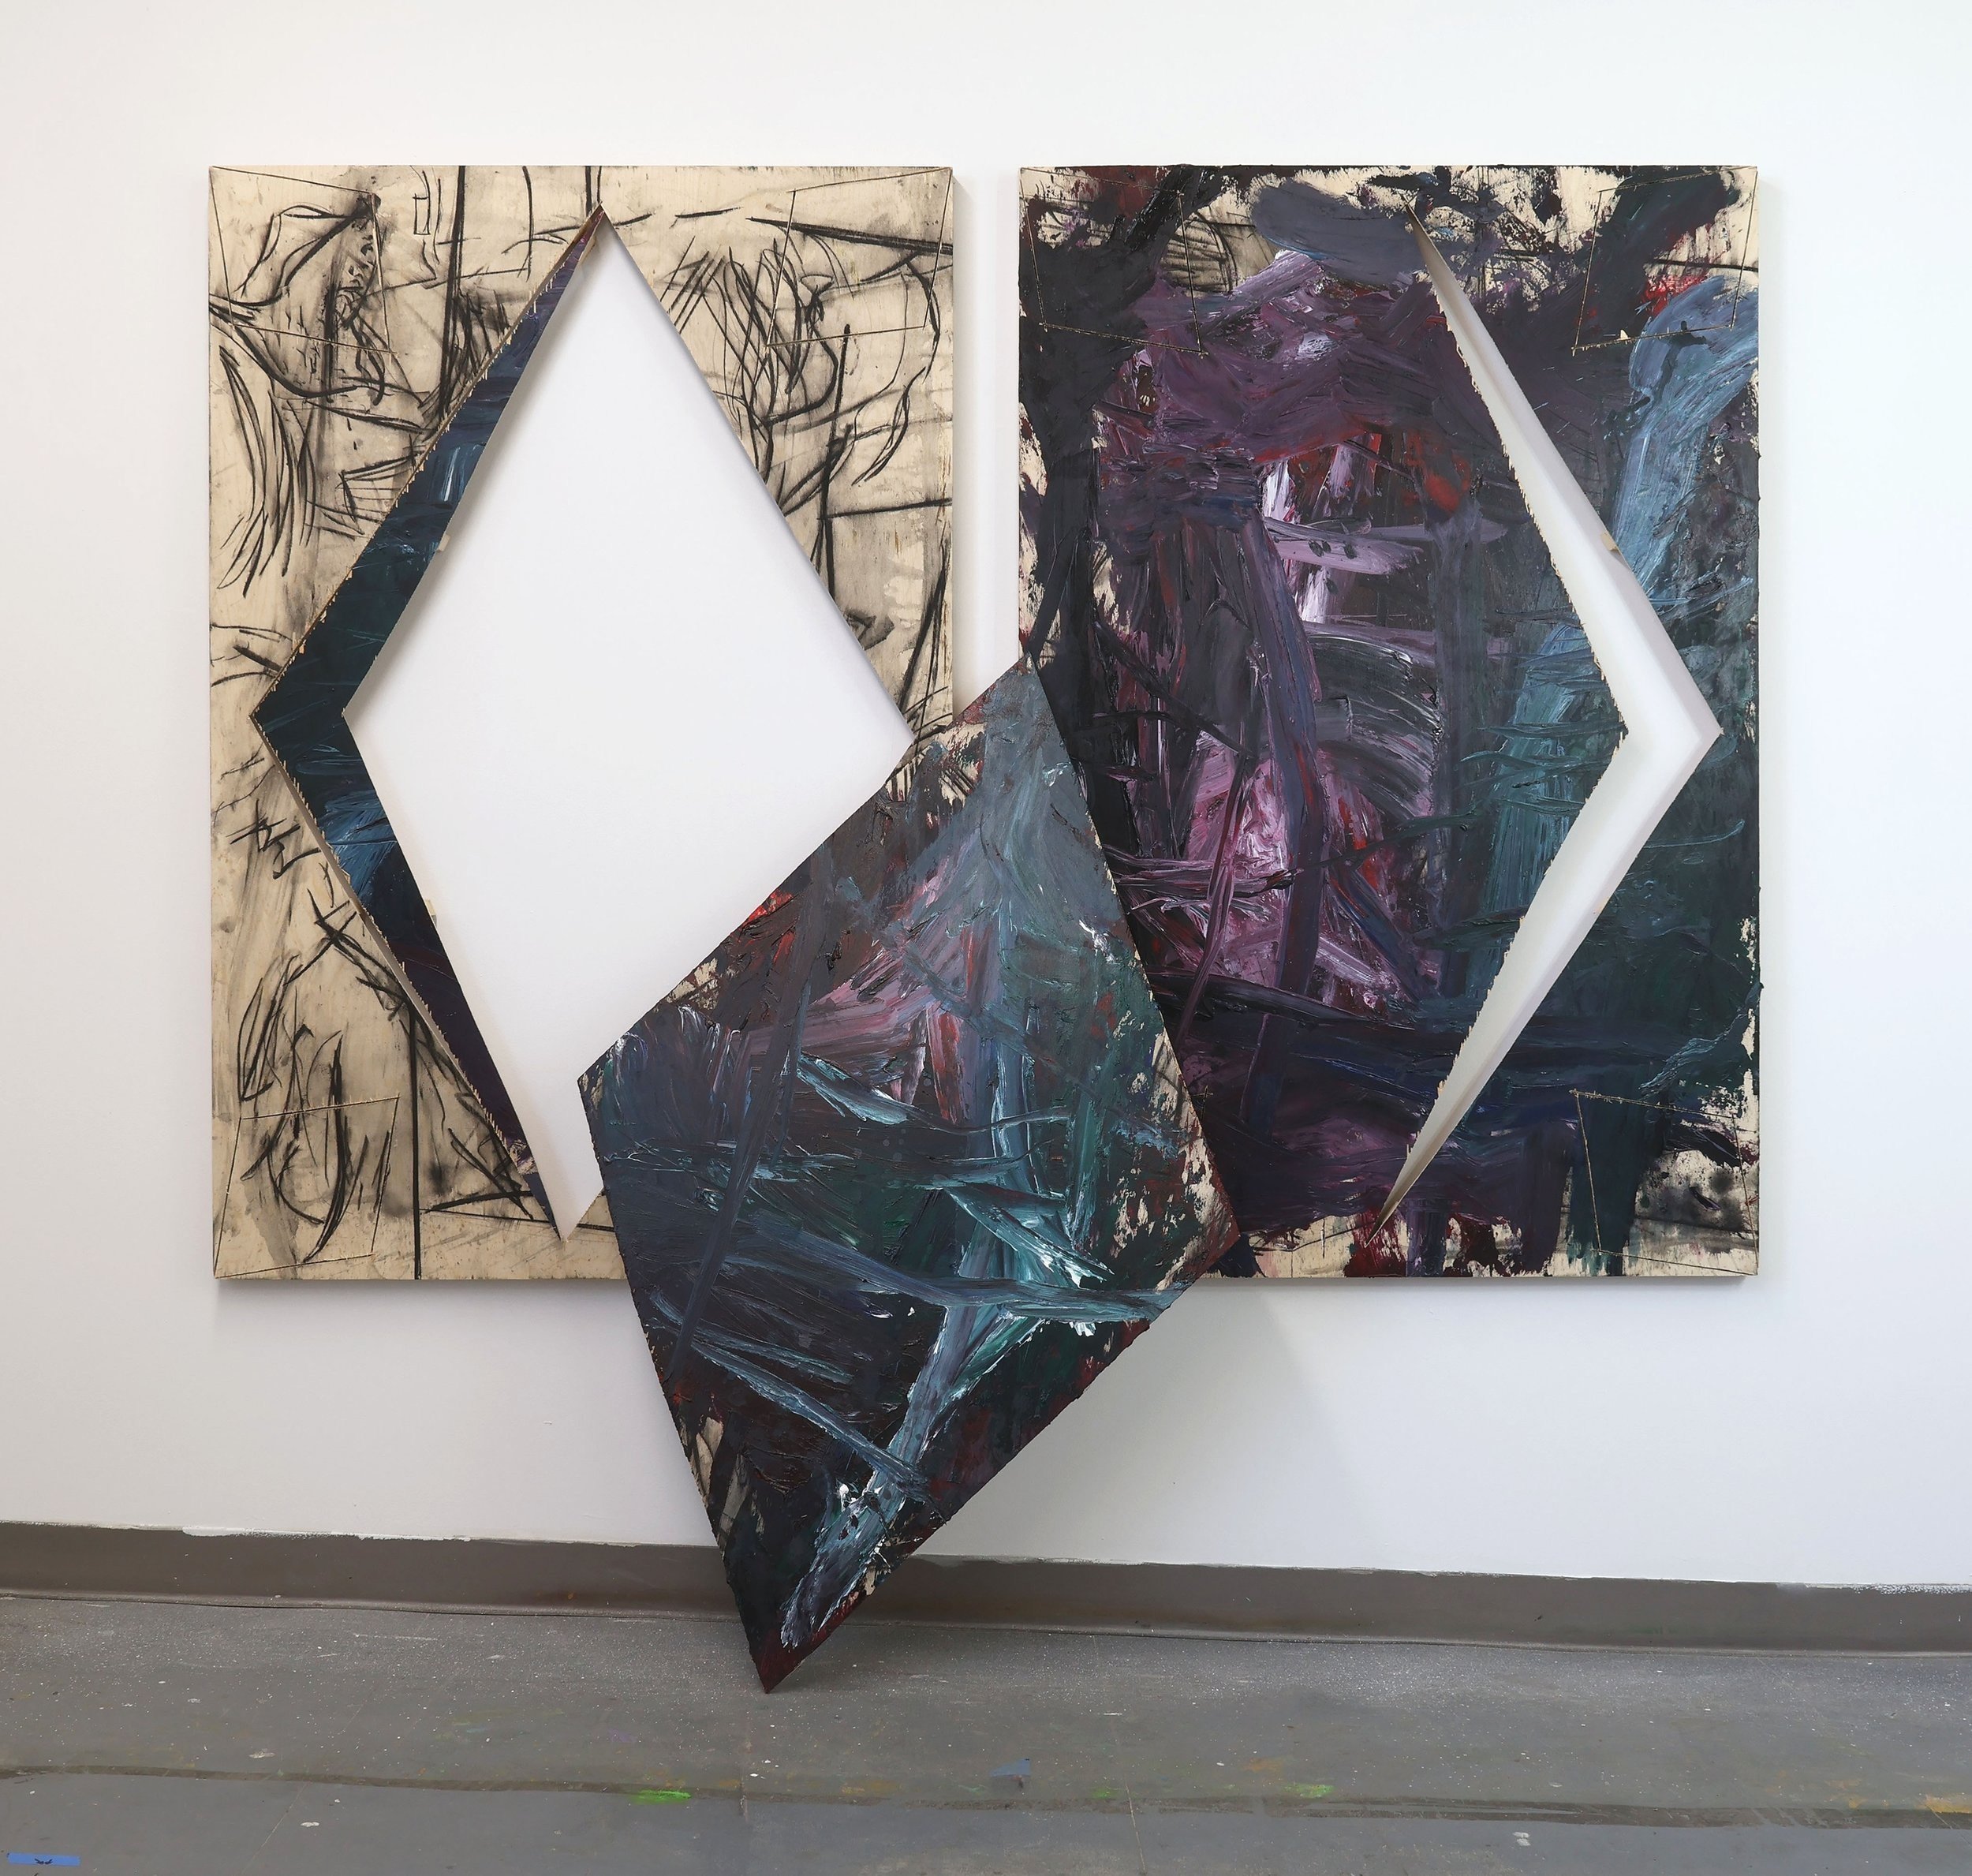  Untitled  Acrylic, charcoal, graphite pencil on wood panel.   80 x 86 x 20 in (Triptych)  2023 